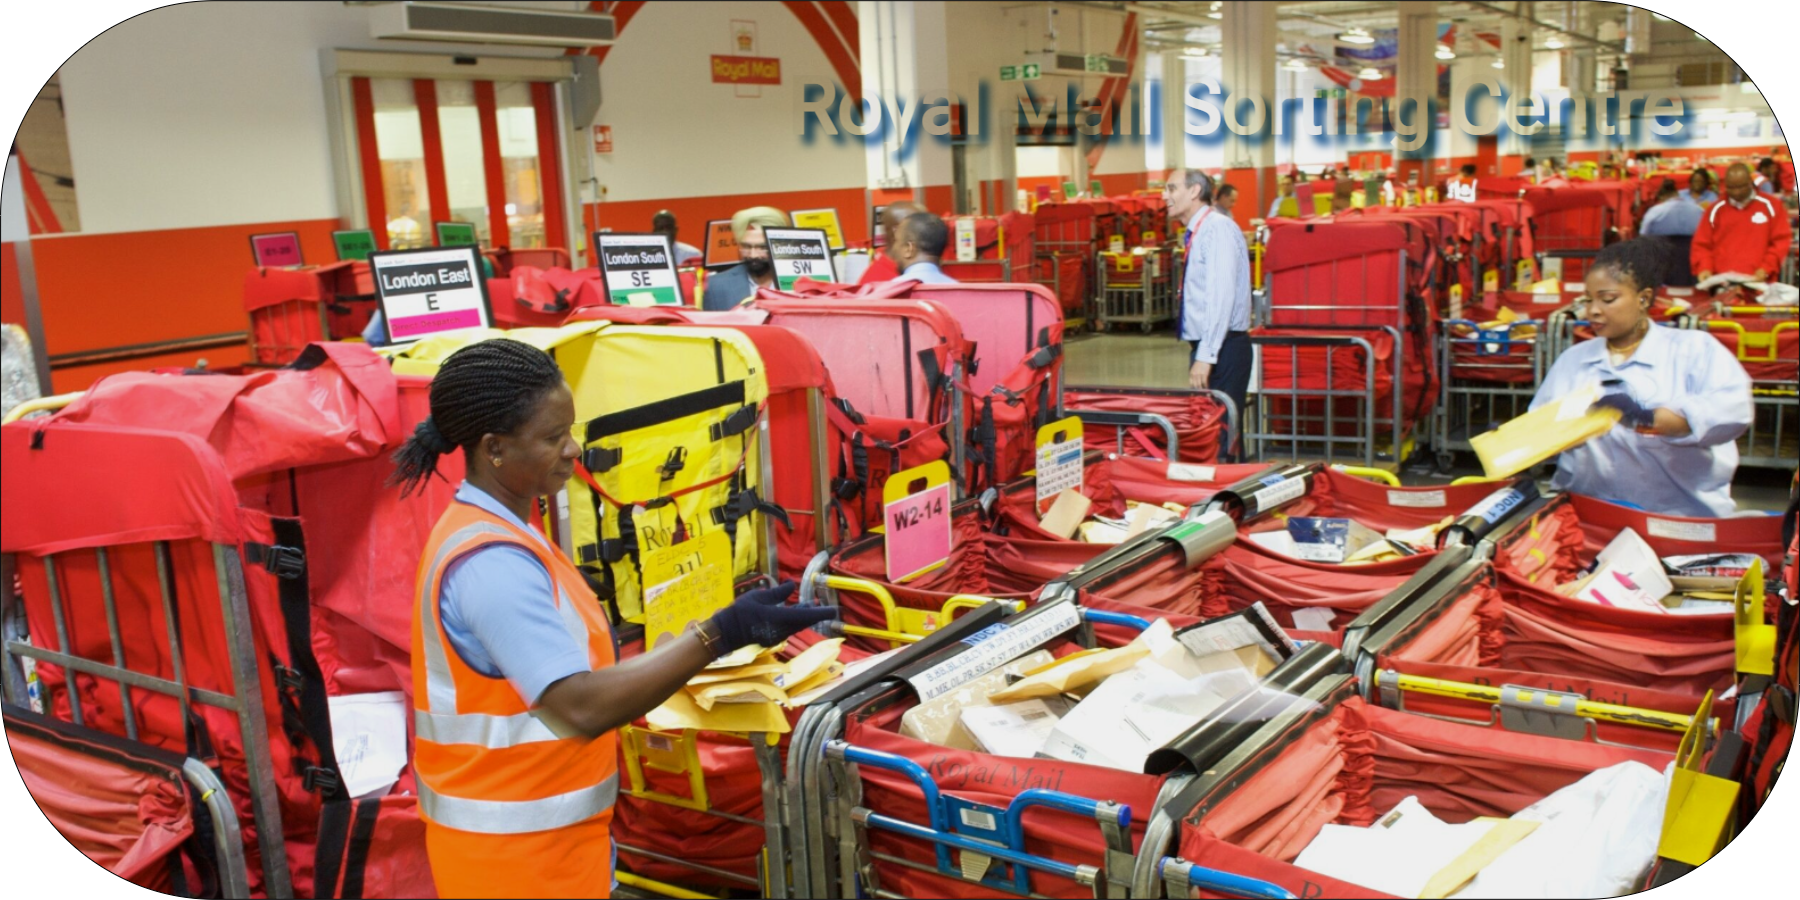 Typical Royal Mail Sorting Office